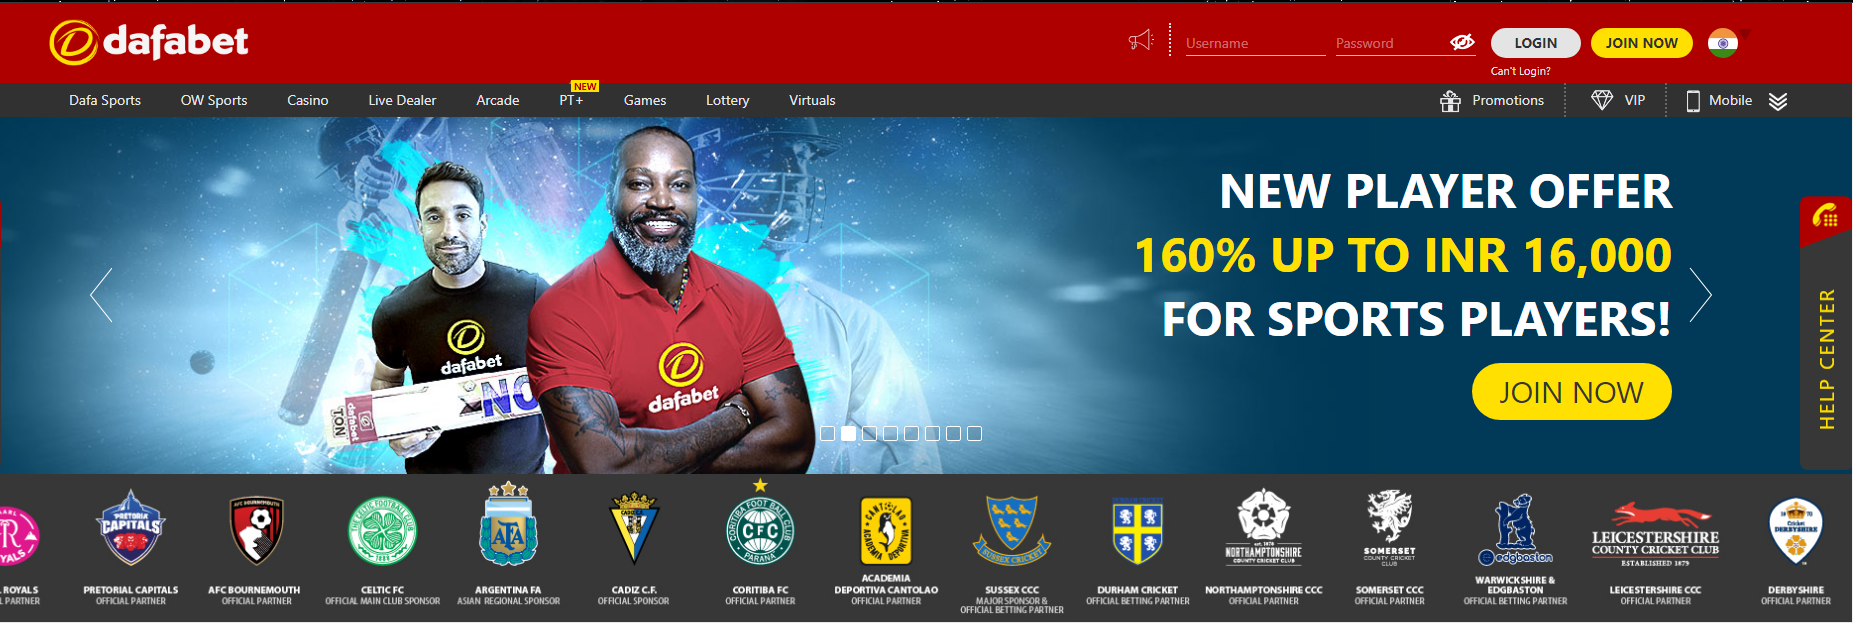 Dafabet New Player Offer